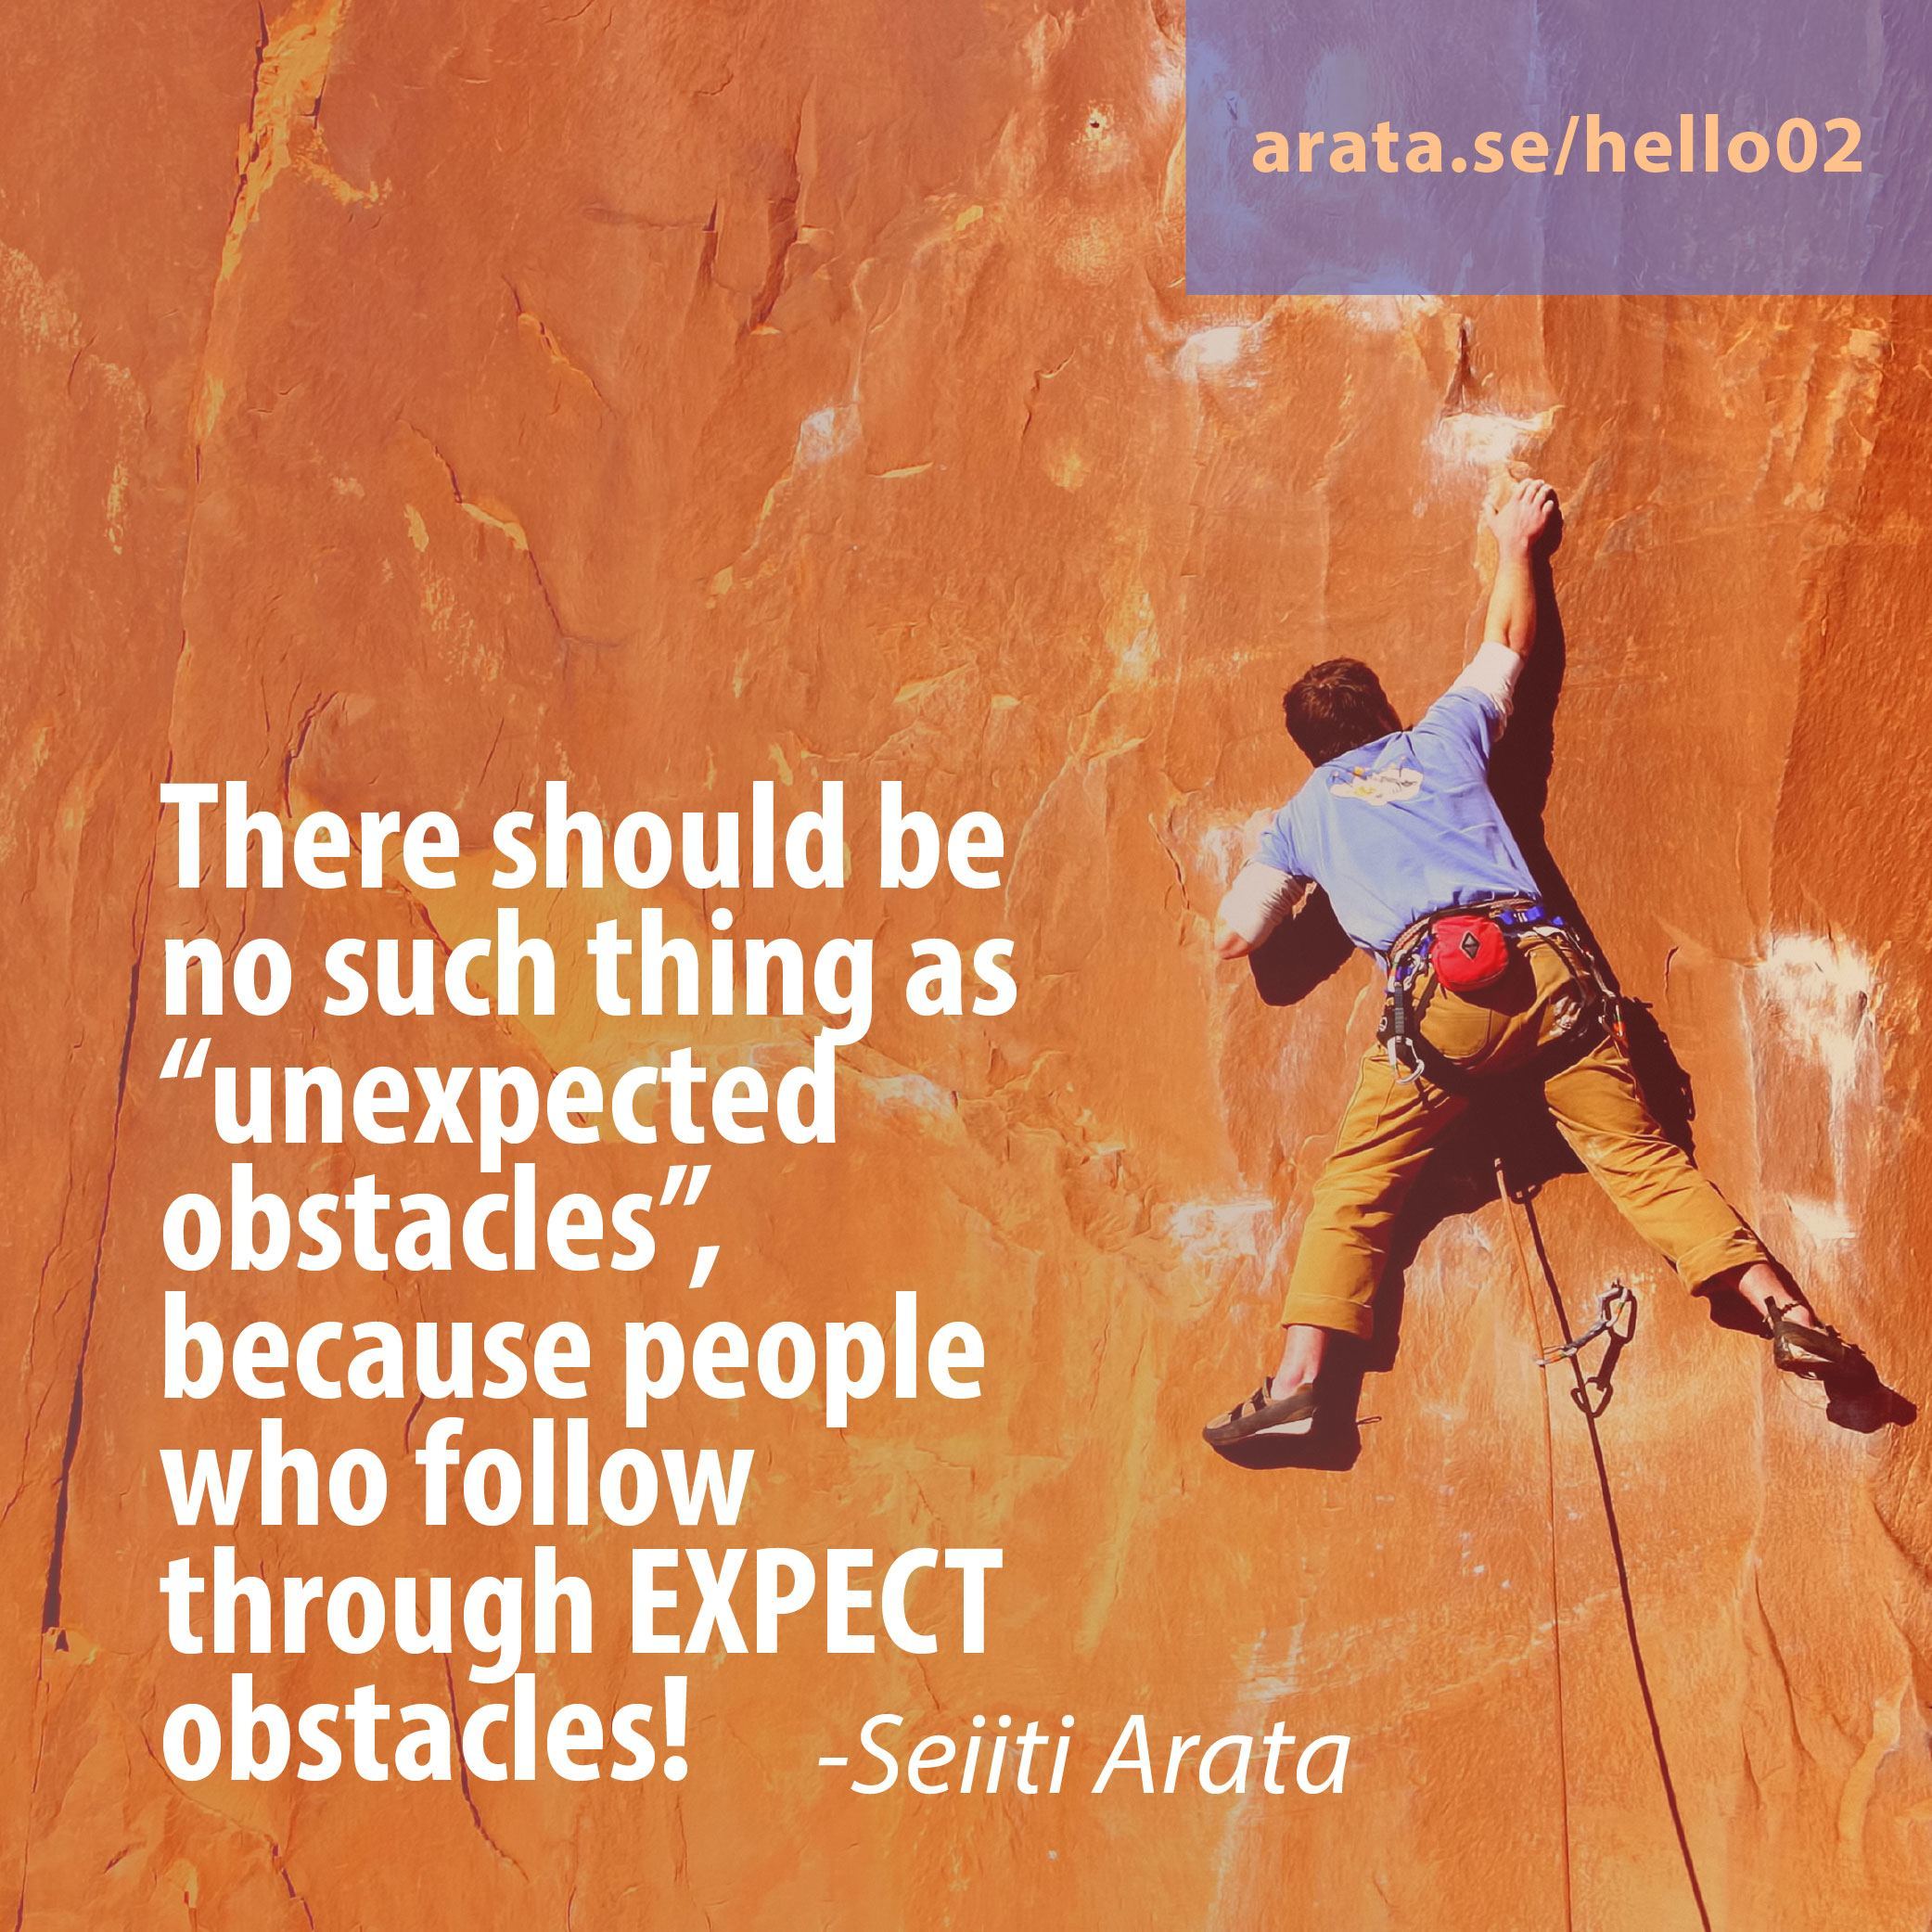 How to follow through. There should be no such thing as “unexpected obstacles”, because people who follow through EXPECT obstacles!